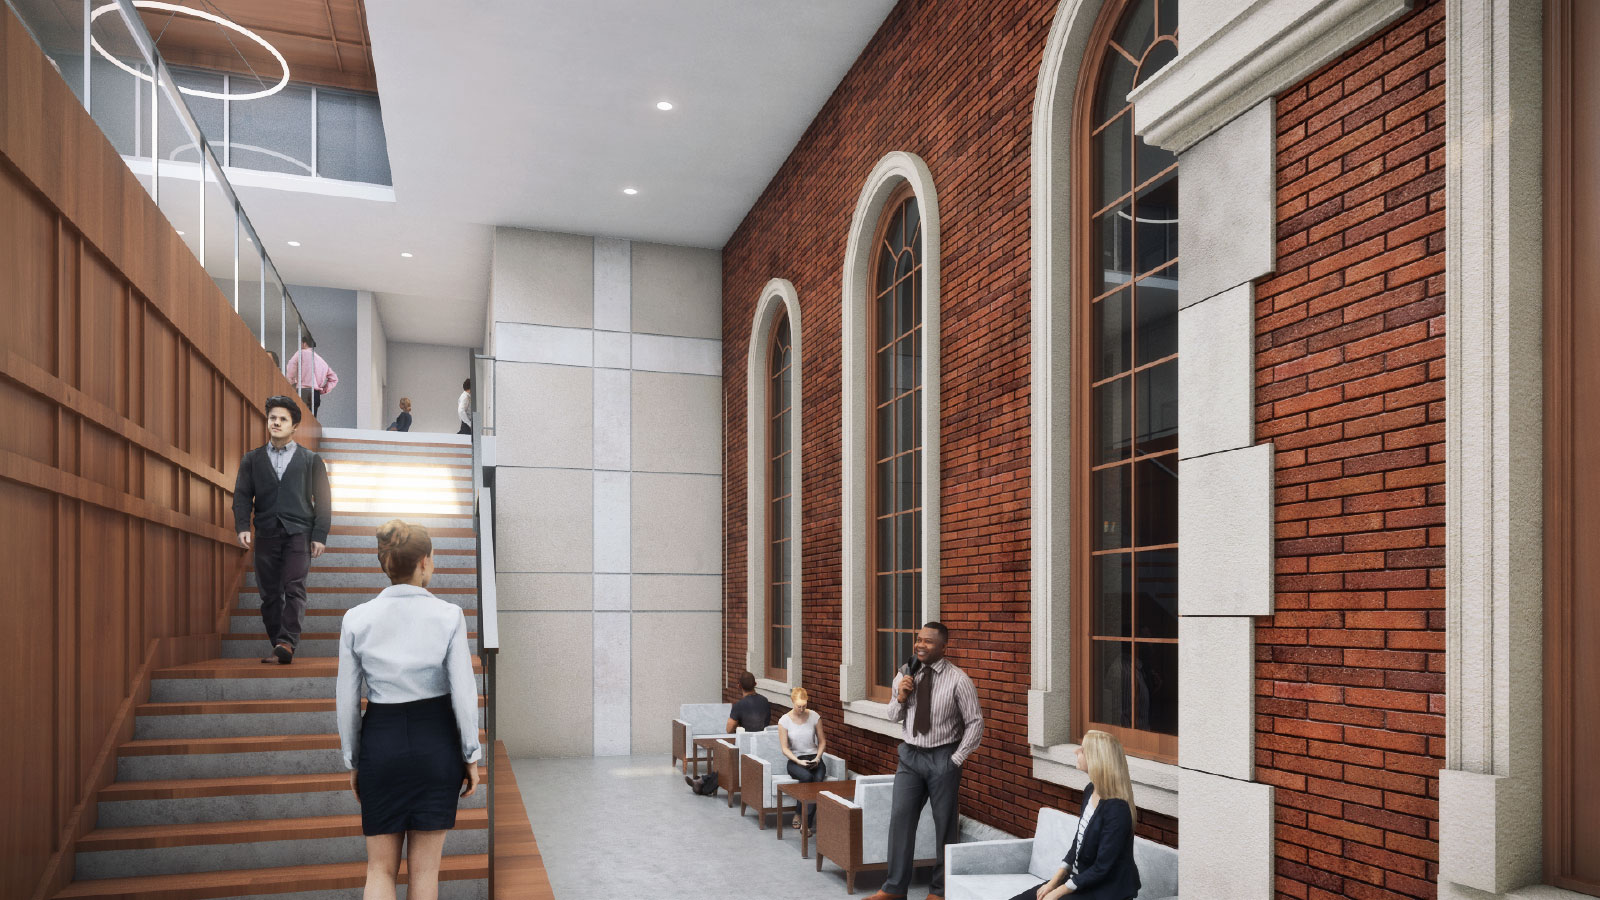 Interior Rendering of Honors Residential College Featuring Stairwell